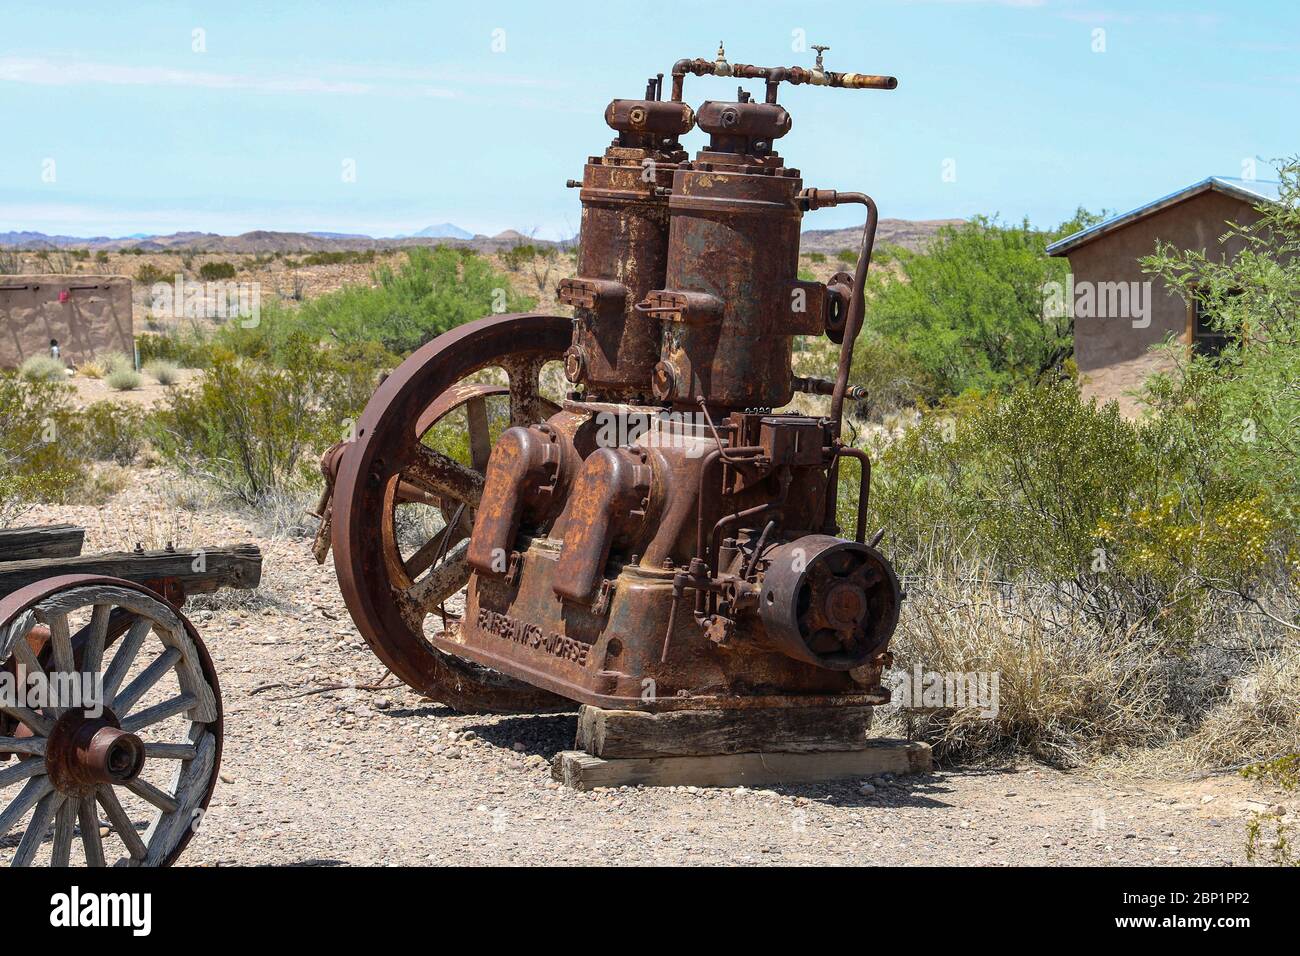 Abandoned Fairbanks-Morse irrigation pump once used in support of farming in the Castolon area of Big Bend National Park, Texas Stock Photo